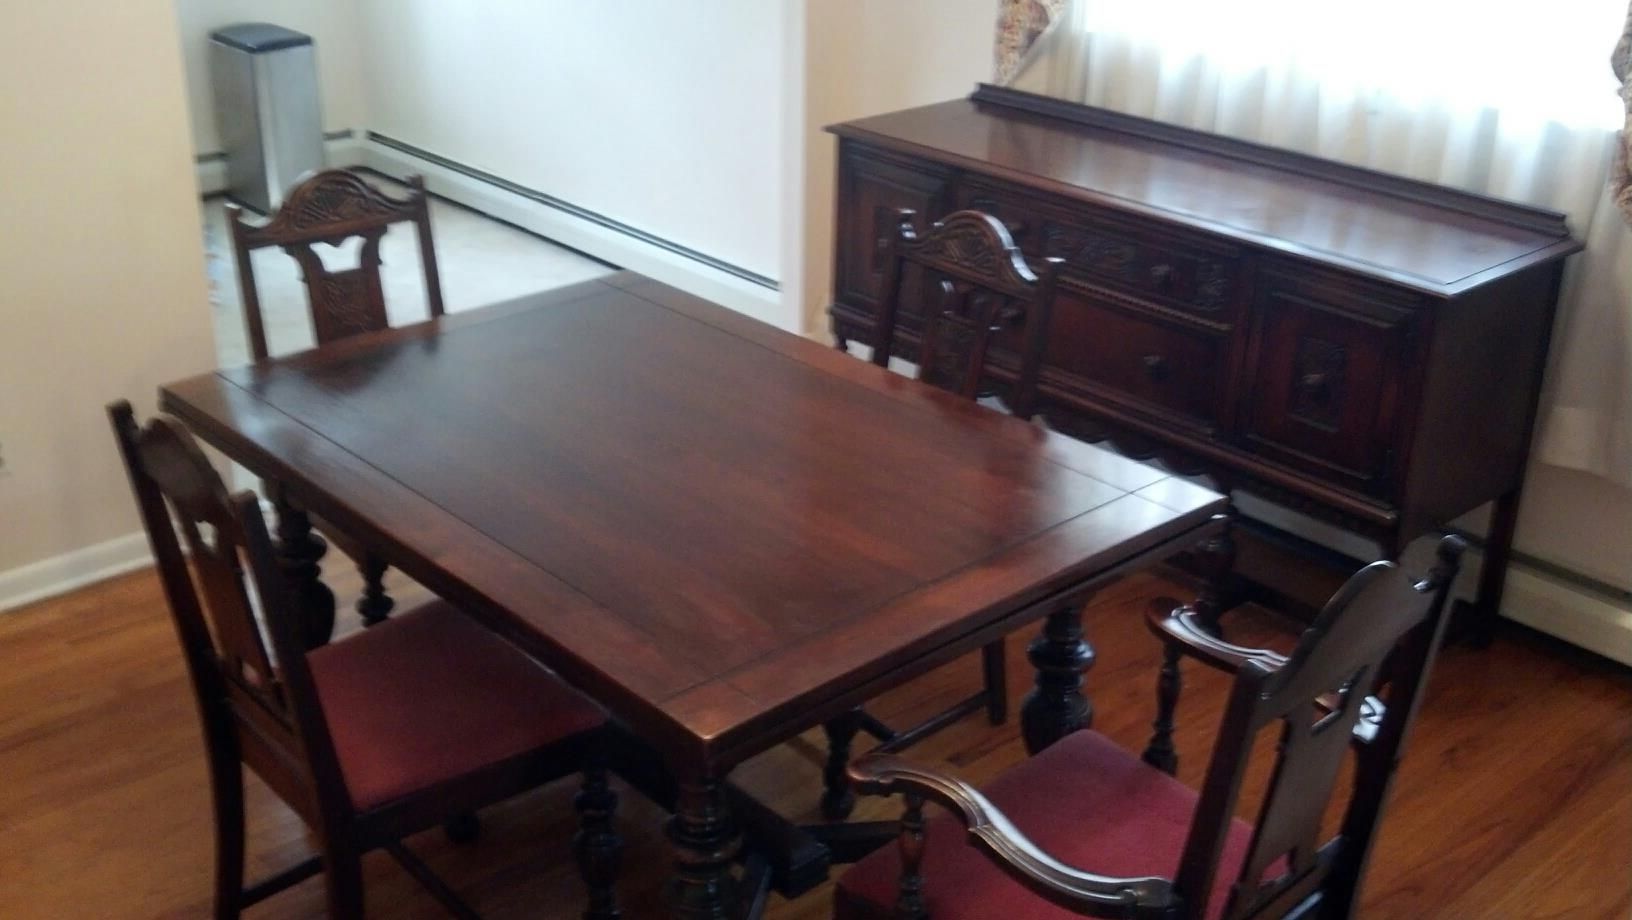 Mahogany Dining Tables And 4 Chairs Inside Most Up To Date I Have A 1940s Vintage Solid Mahogany Dining Room Set That Includes (View 14 of 25)